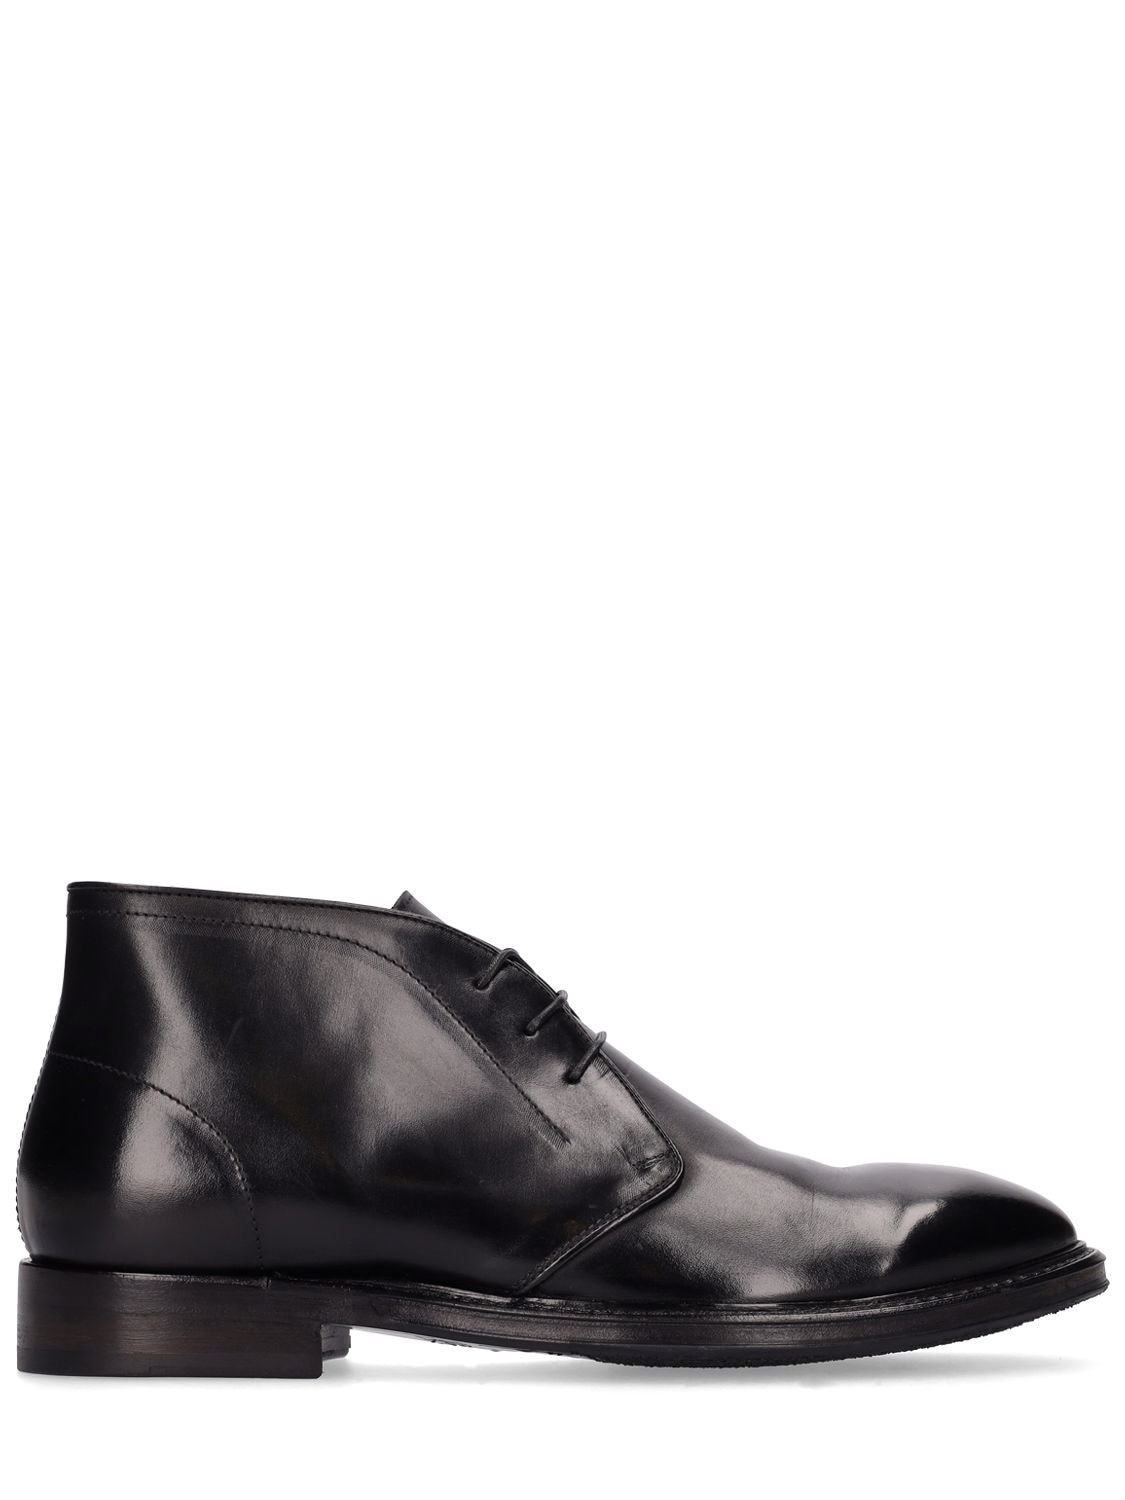 ALBERTO FASCIANI POLISHED LEATHER LACE-UP ANKLE BOOTS